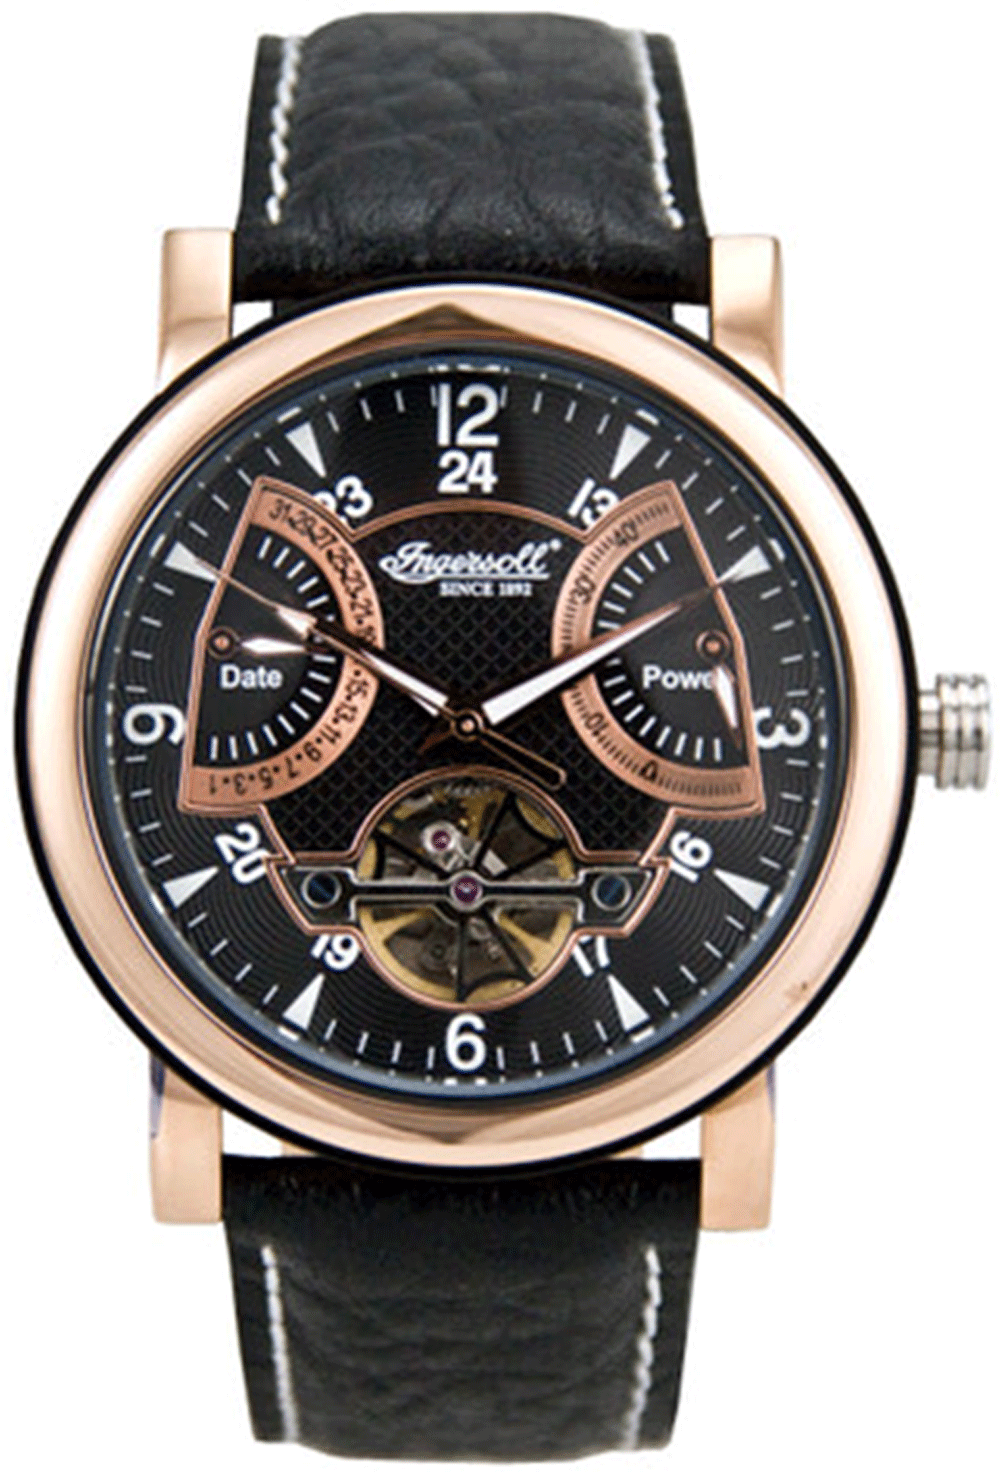 About Ingersoll Watches | Ingersoll Watches